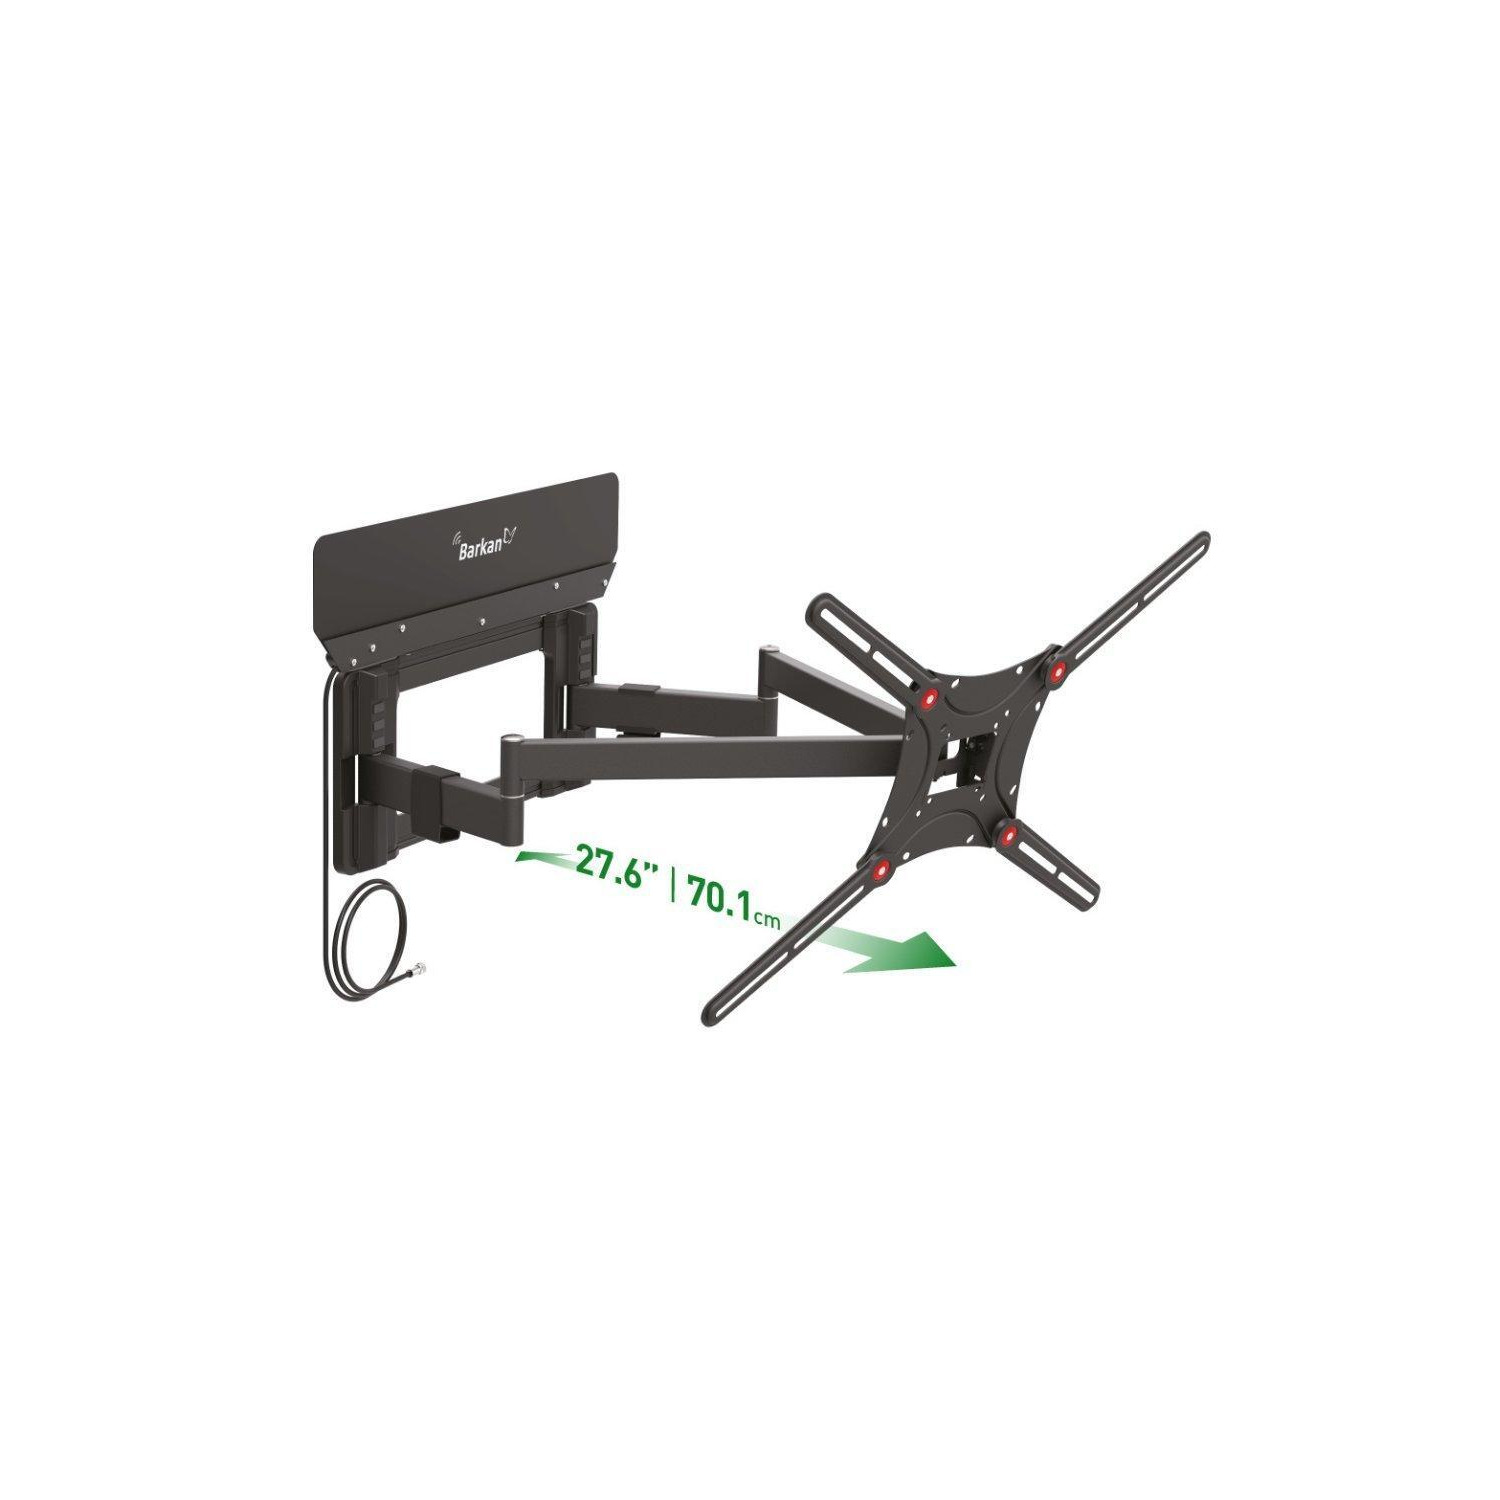 "13"" to 90"" Full Motion TV Wall Mount Bracket with Integrated Antenna" - image 1